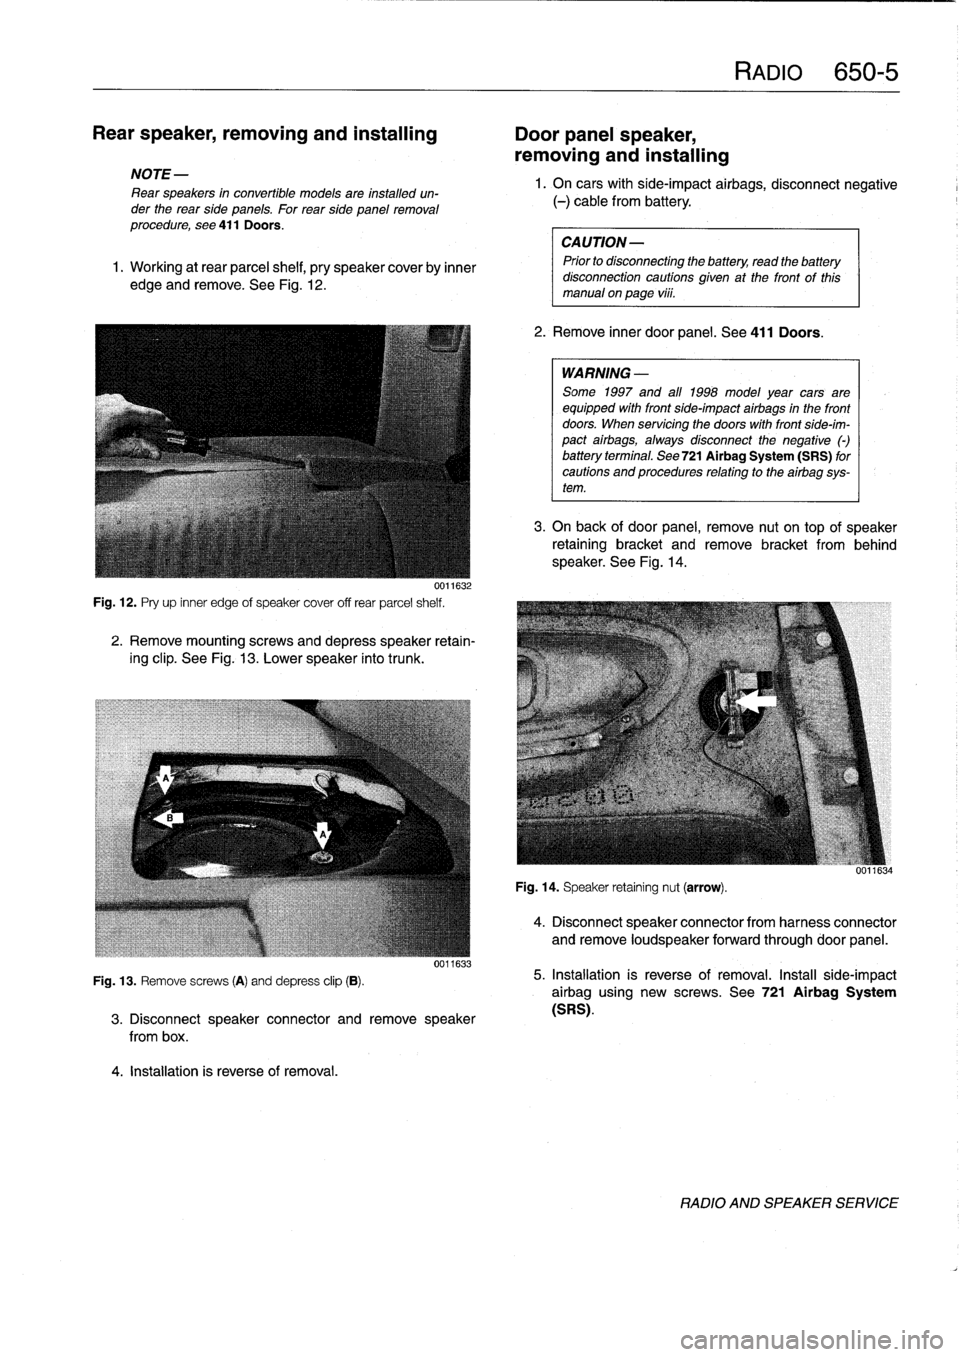 BMW 328i 1997 E36 User Guide 
Rear
speaker,
removing
and
installing

	

Door
panel
speaker,

removing
and
installing

NOTE
-

Rear
speakers
in
convertible
models
are
installed
un-
der
the
rear
side
panels
.
For
rearside
panelremo